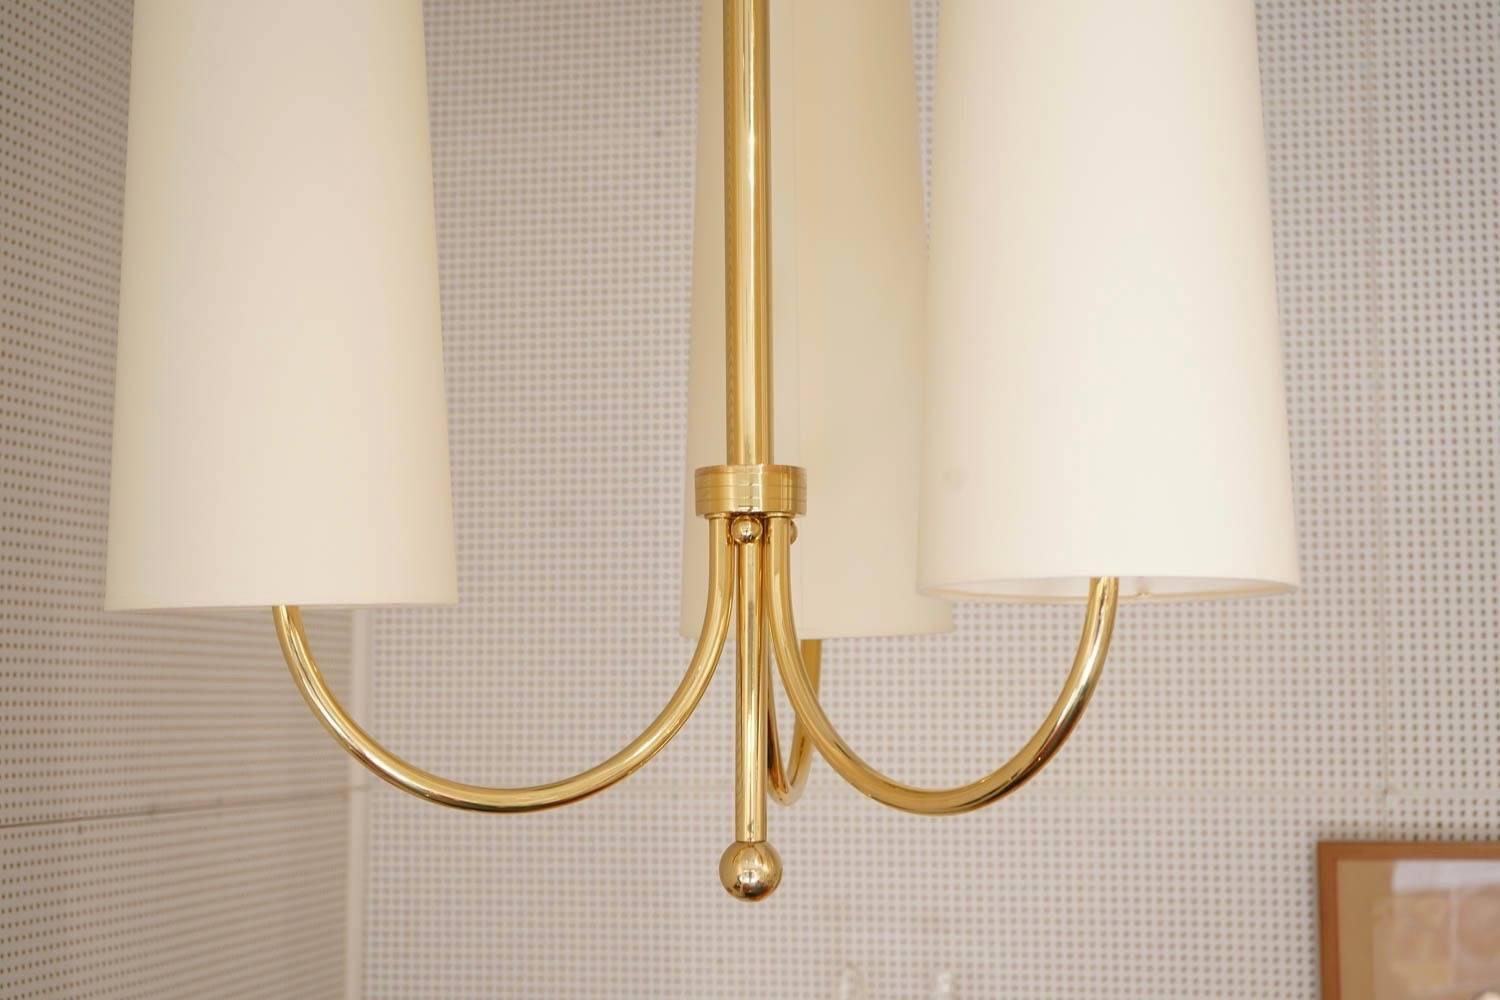 1960 Maison Honore Large Pair of Maison Honore Brass Sconces
Each sconce consists of brass central stem ended with a brass ball.
 Three lighted arms with off-white cotton lampshade.